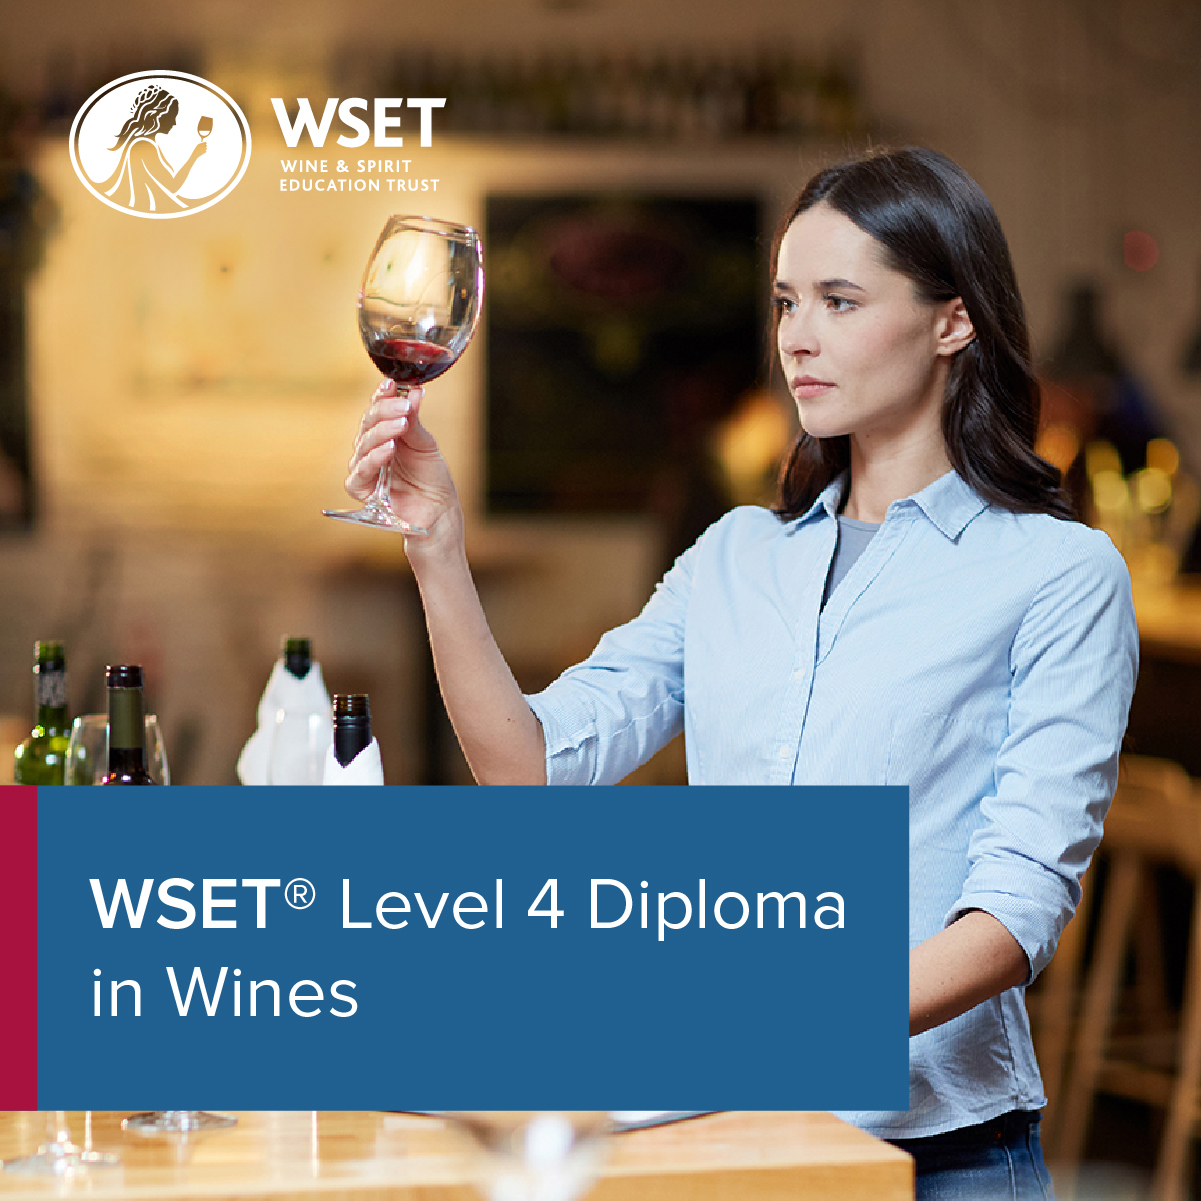 WSET Level 4 Diploma in Wines and Spirits